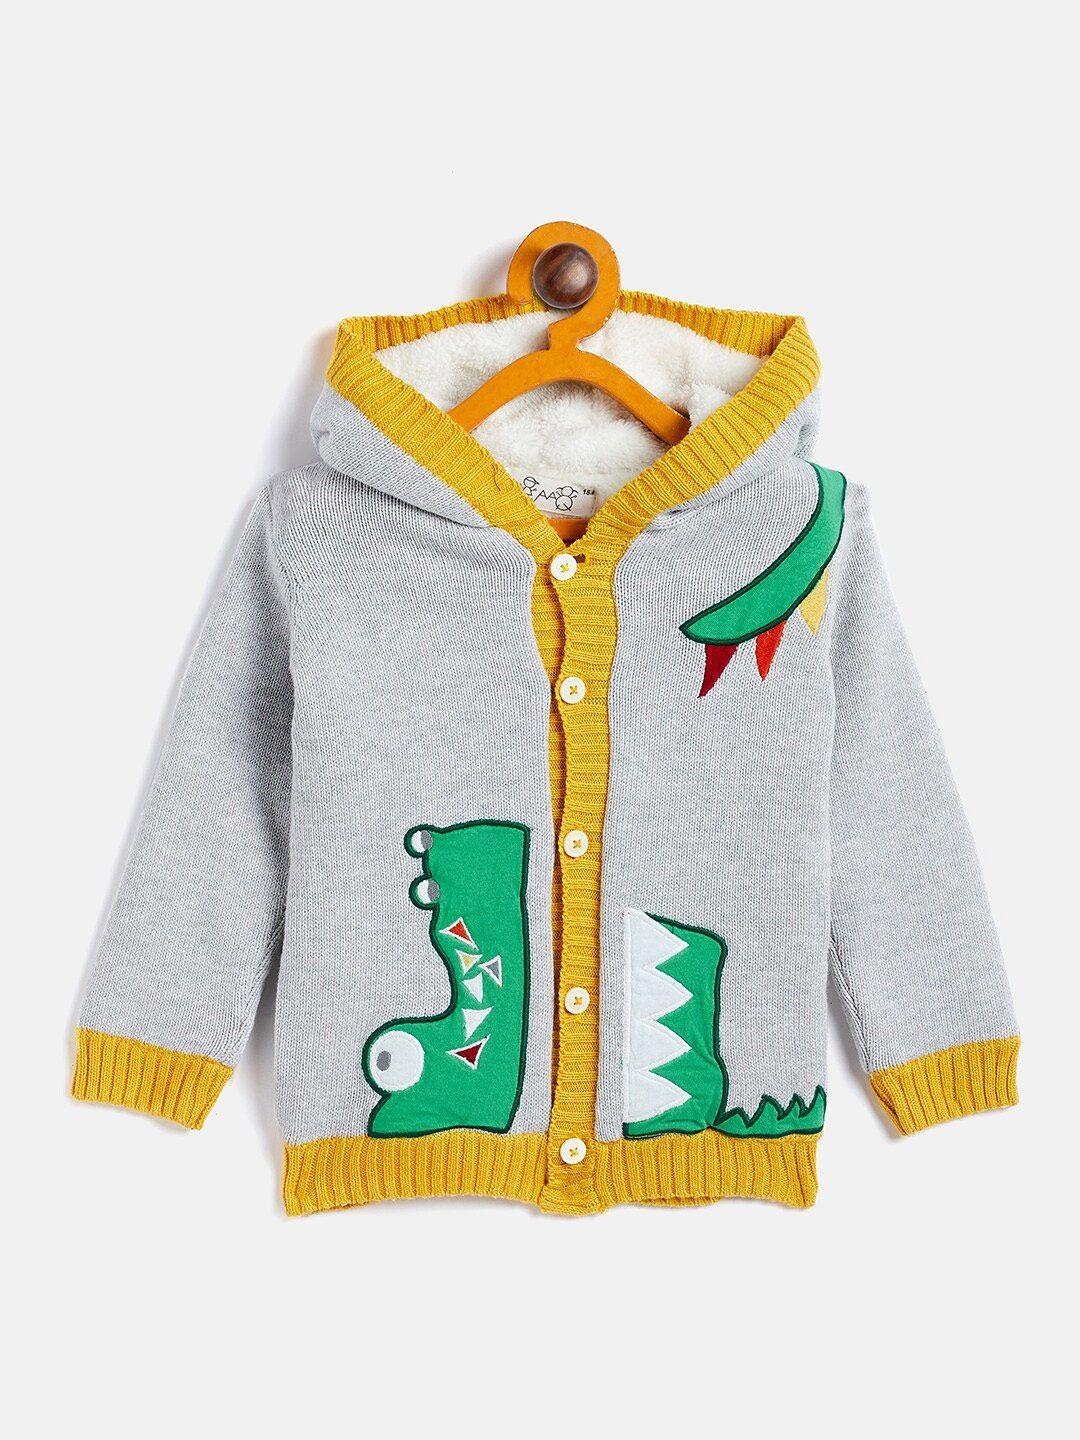 wildlinggs infants graphic printed hooded pure cotton cardigan sweater